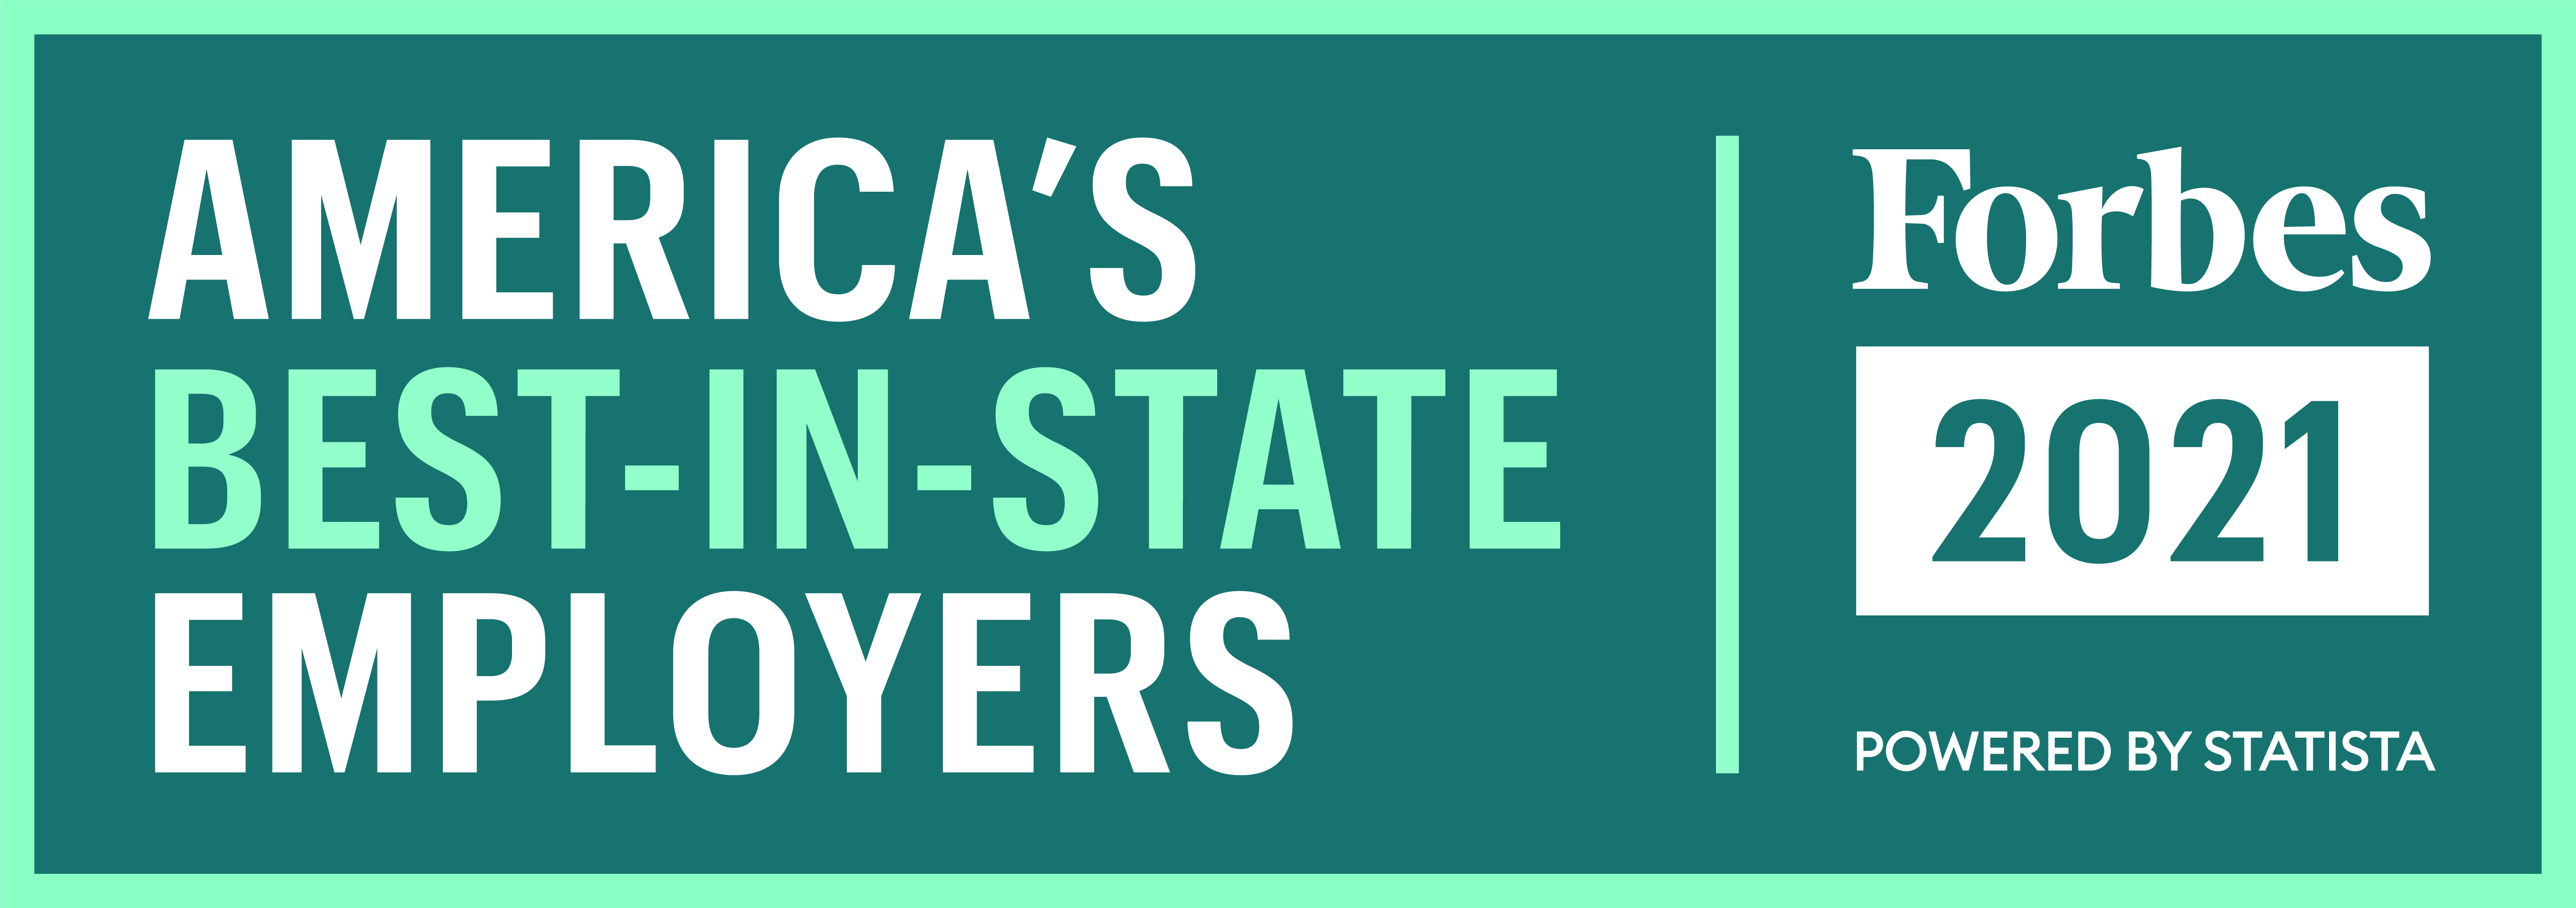 America's Best-in-State Employers | Forbes 2021